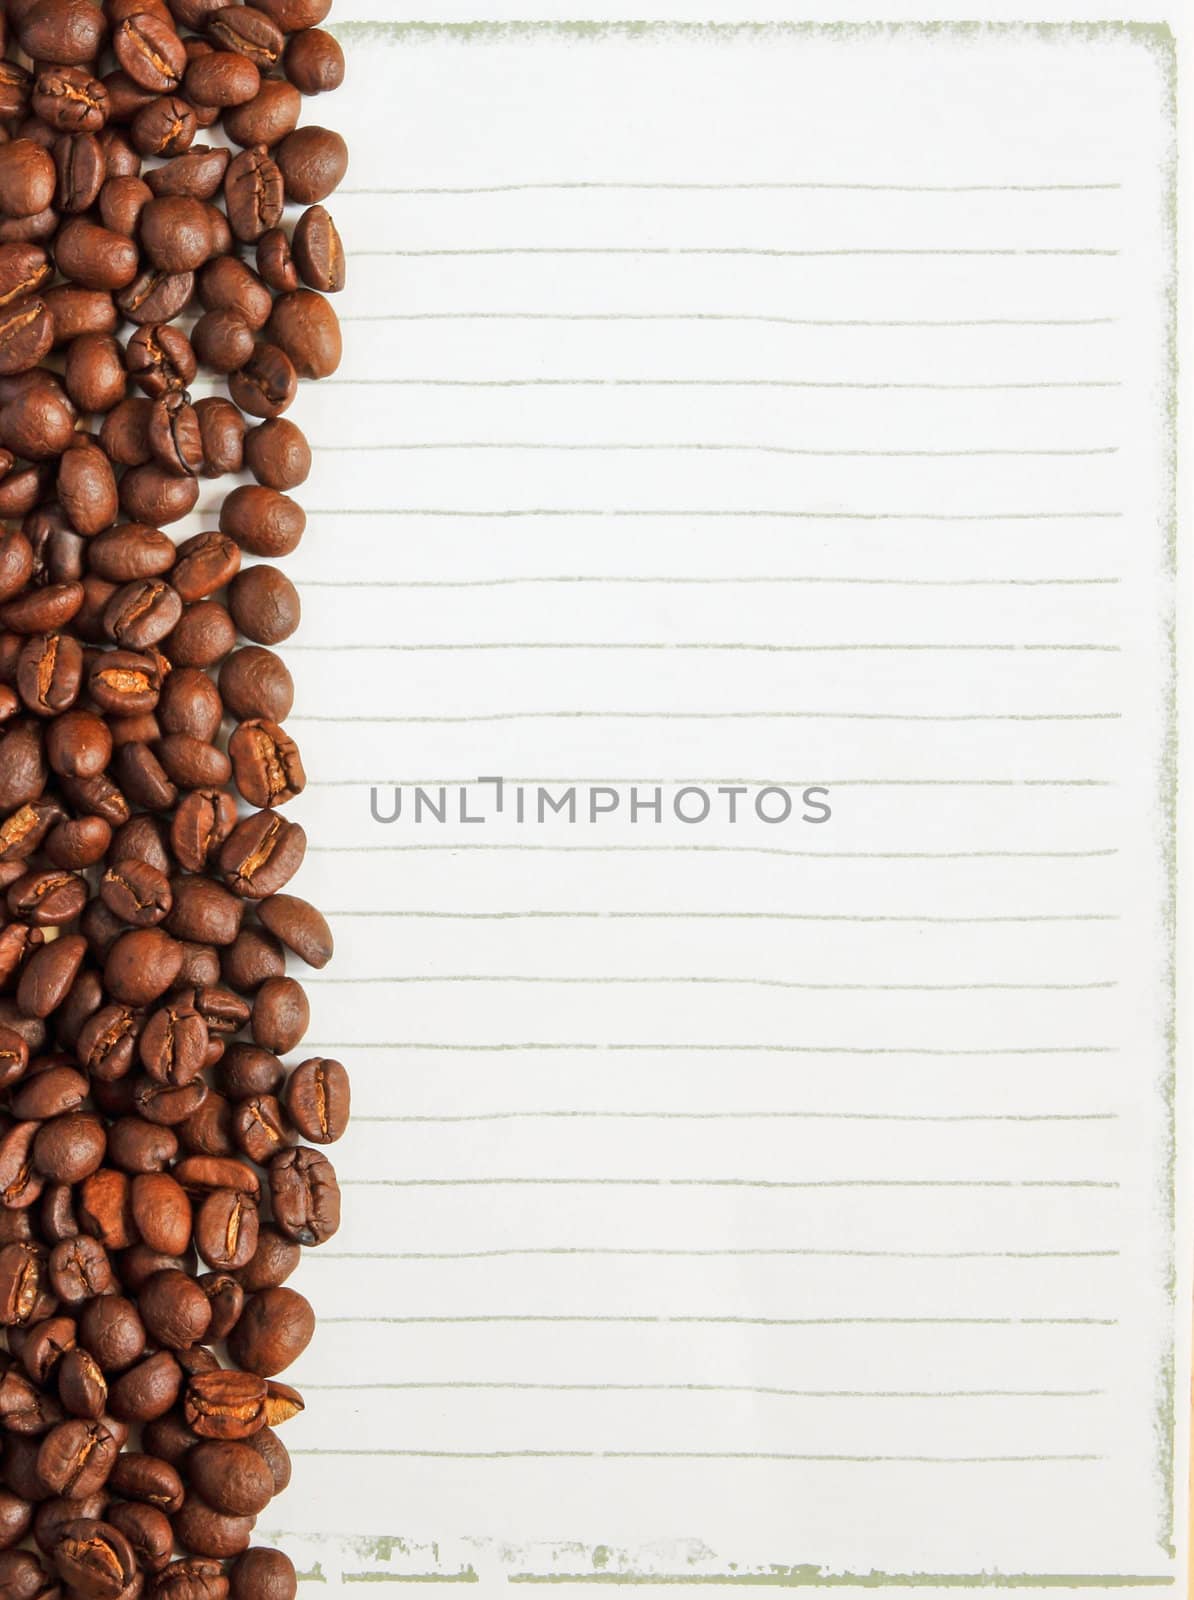 Coffee beans on white paper background for notes  by nuchylee